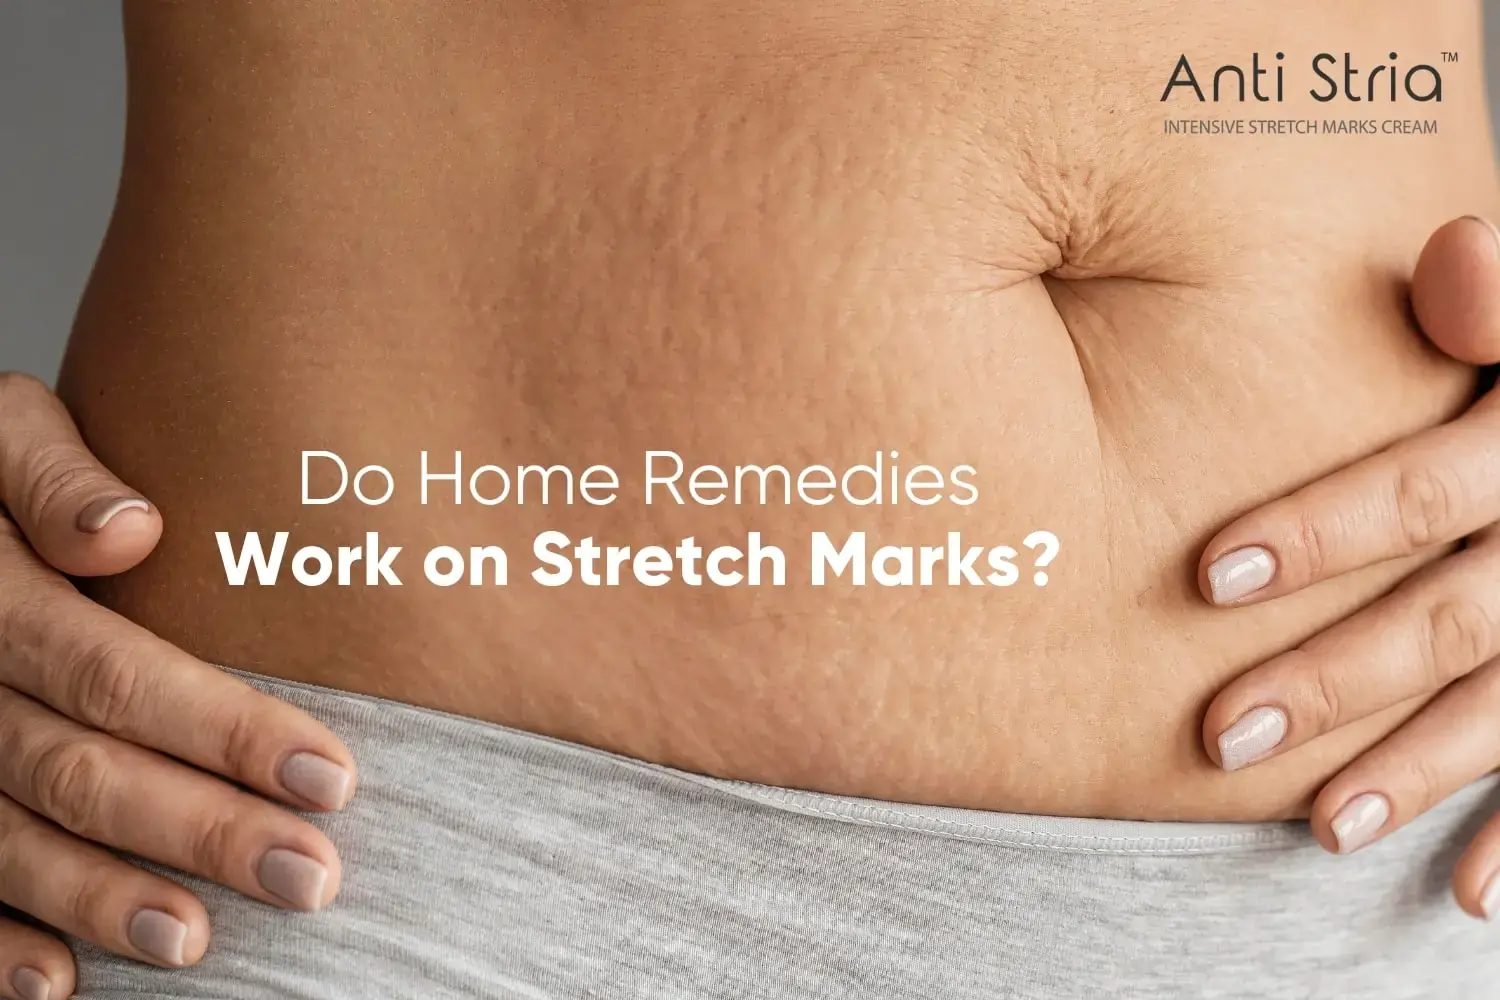 NATURAL HOME REMEDIES FOR STRETCH MARKS